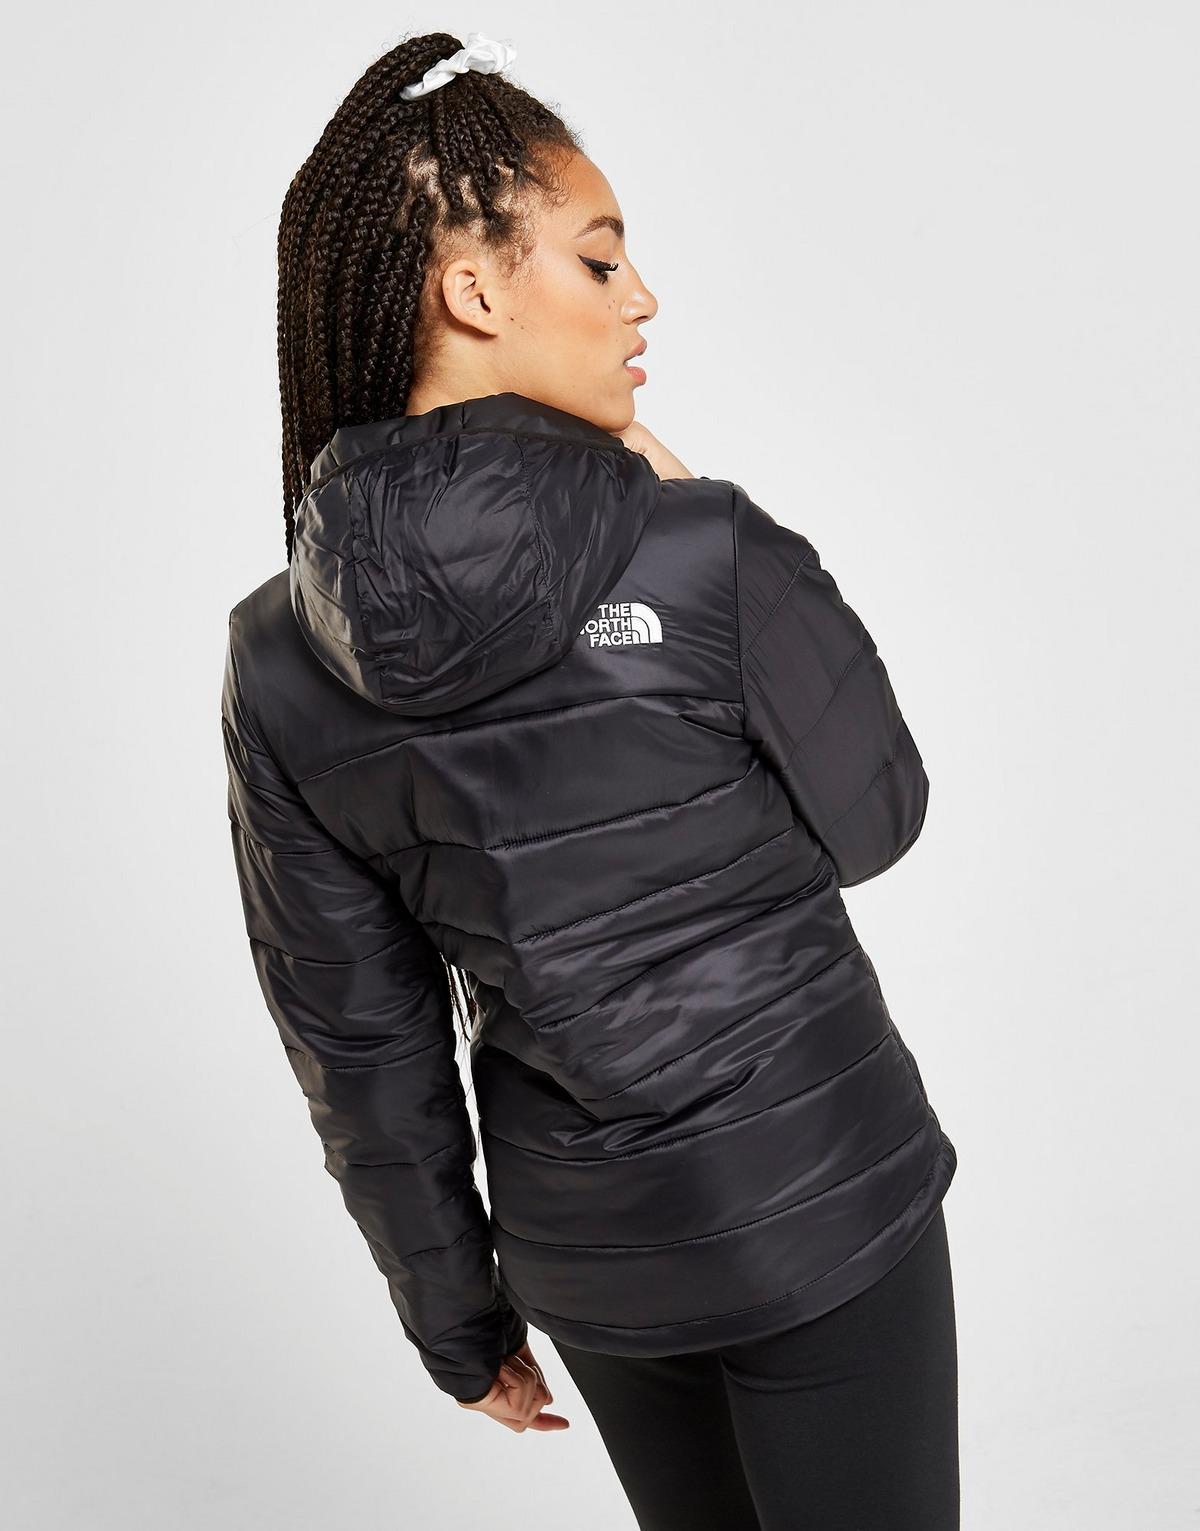 The North Face Panel Jacket Hotsell, SAVE 60%.